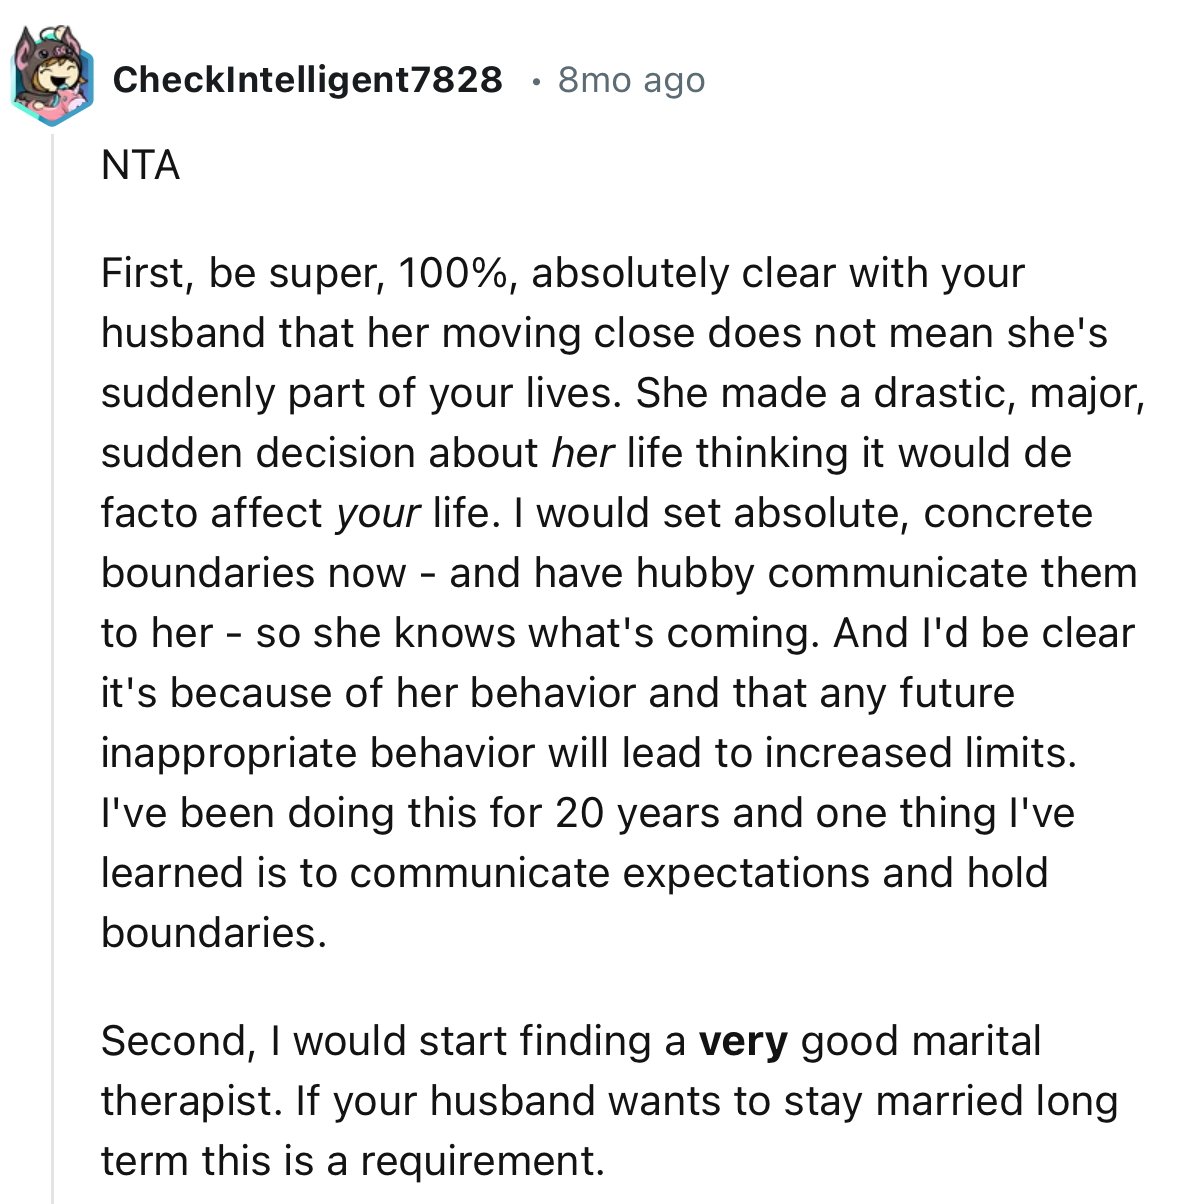 “Absolutely clear with your husband that her moving close does not mean she's suddenly part of your lives.”